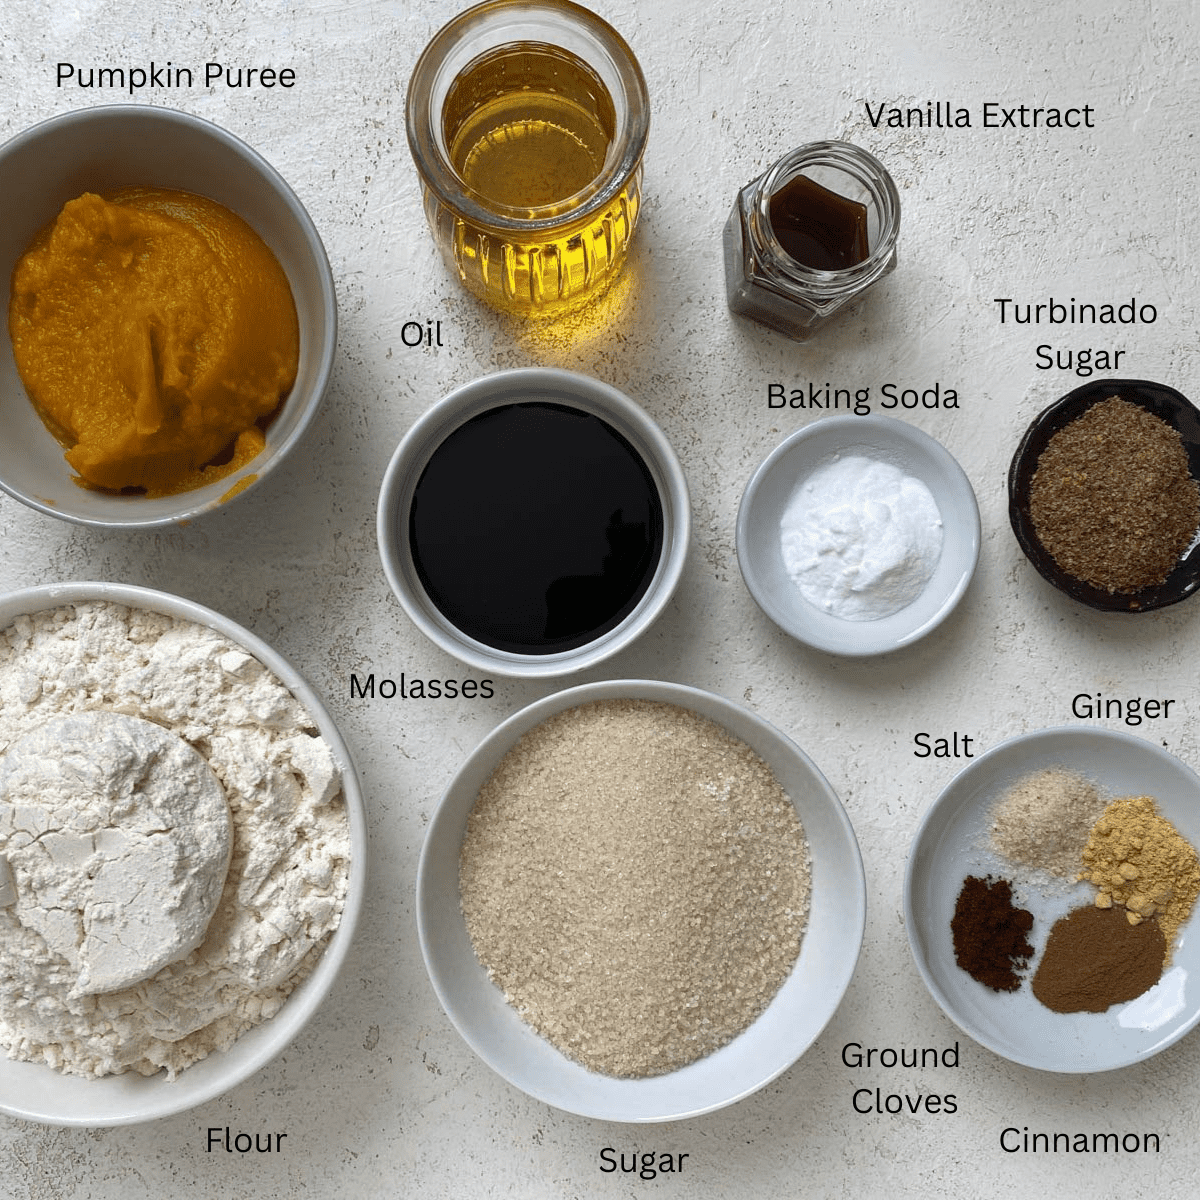 ingredients measured out for Soft Pumpkin Gingersnap Cookies against a white surface